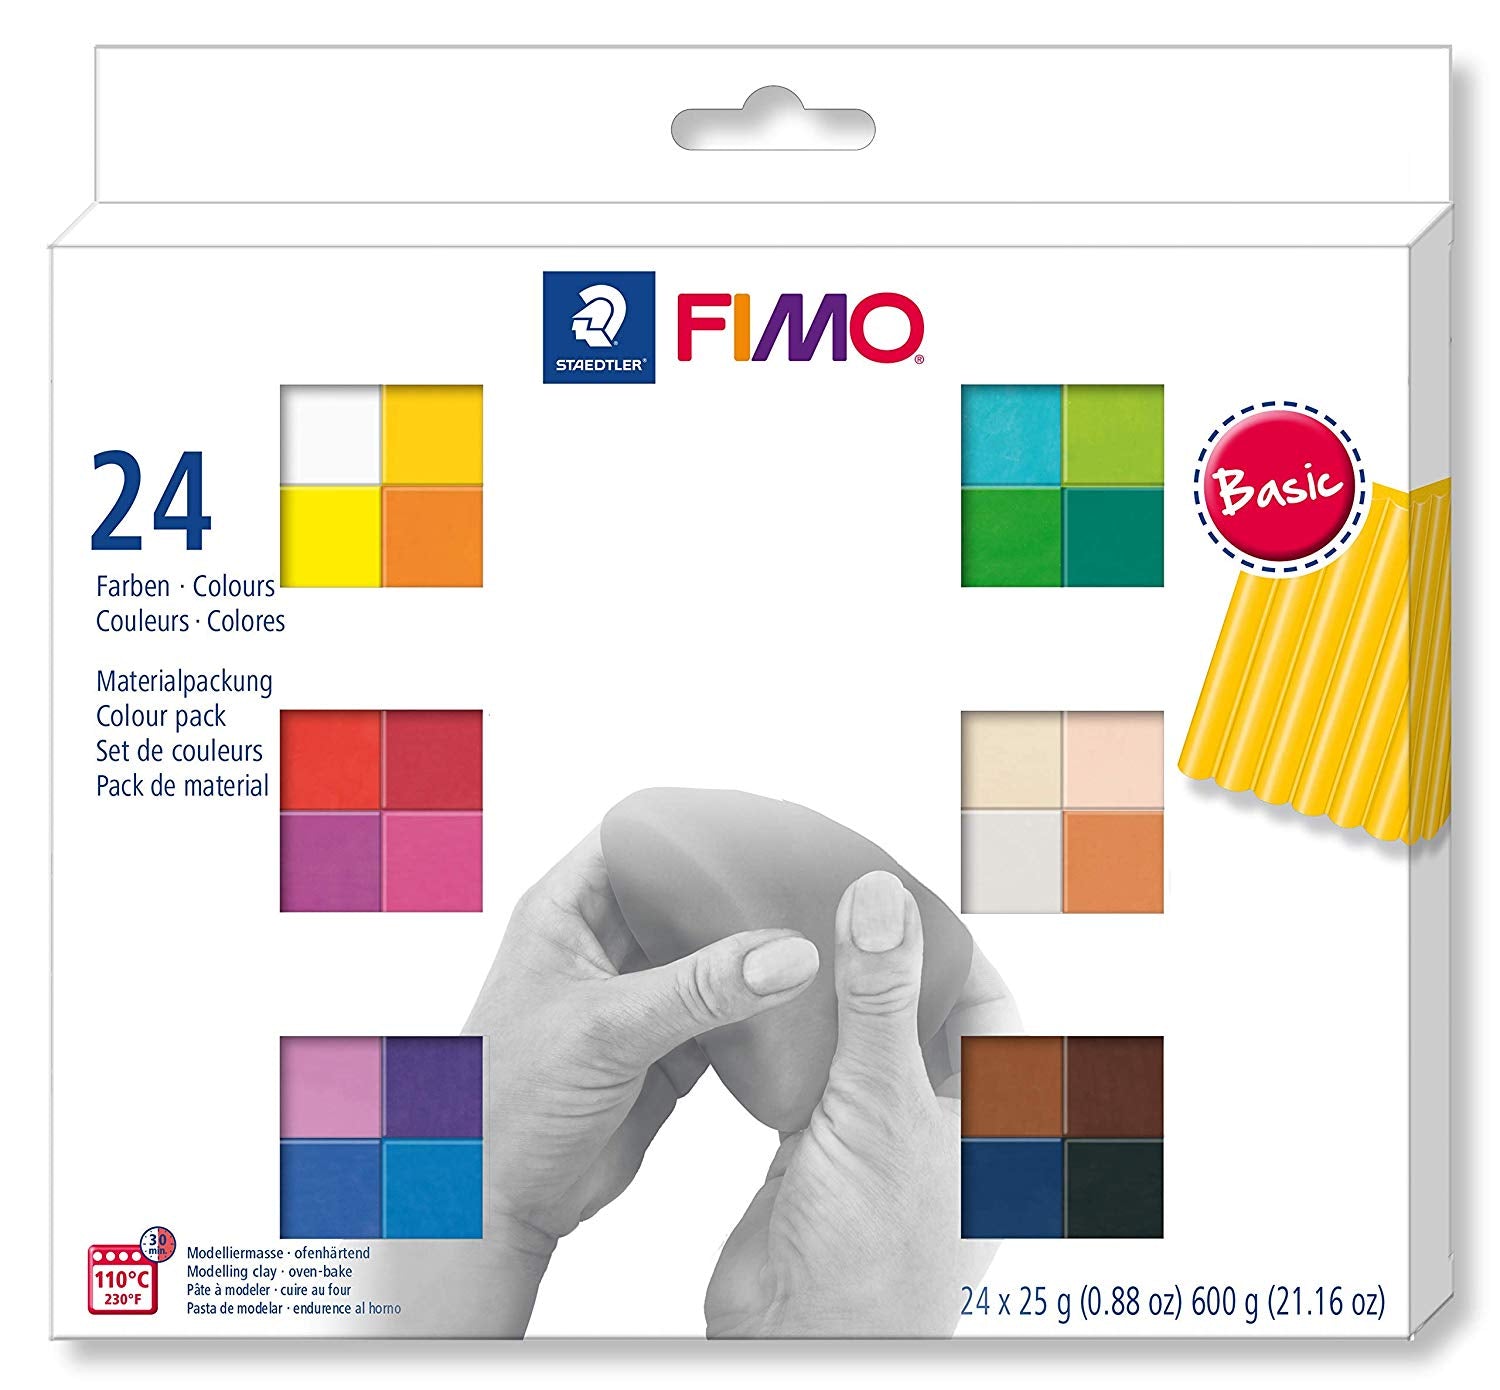 FIMO Kids Polymer Clay, Lime, Nr. 51, 42 Gr, Oven-hardening Modeling Clay  Color Pack, Soft and Smooth Clay for Decor and Jewelry 